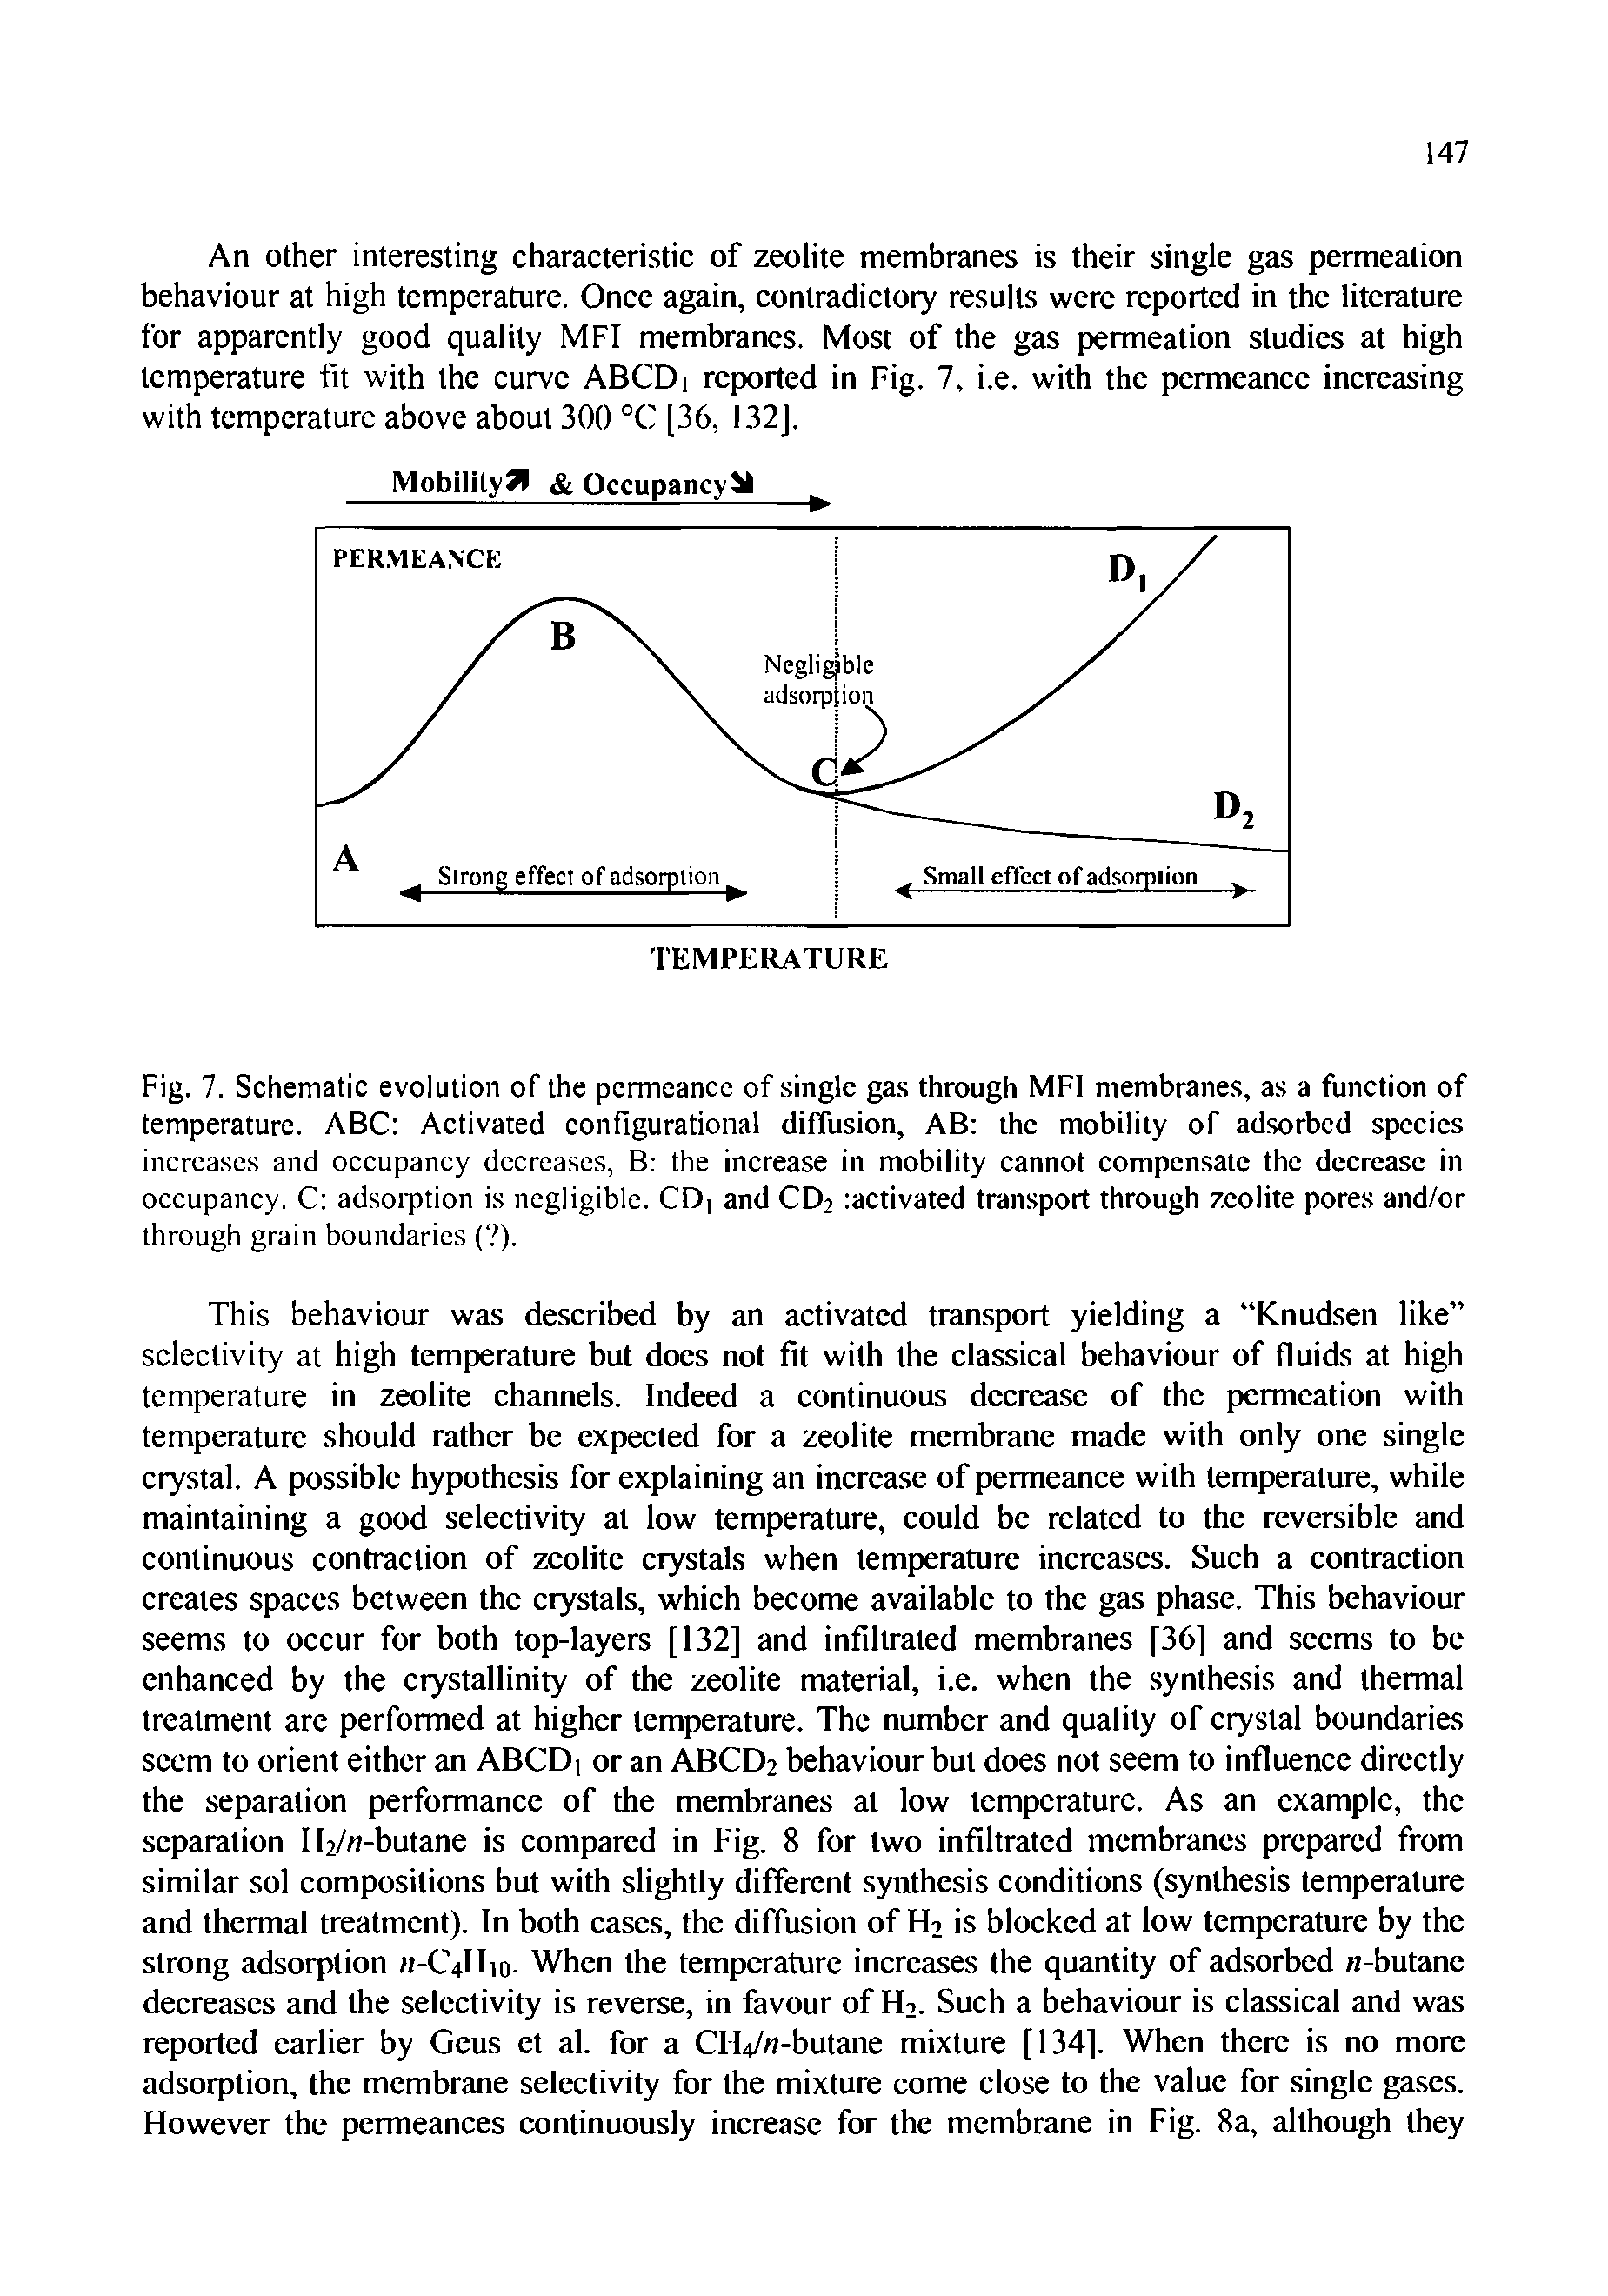 Fig. 7. Schematic evolution of the permeance of single gas through MFI membranes, as a function of temperature. ABC Activated configurational diffusion, AB the mobility of adsorbed species increases and occupancy decreases, B the increase in mobility cannot compensate the decrease in occupancy. C adsorption is negligible. CD, and CD2 activated transport through zeolite pores and/or through grain boundaries ( ).